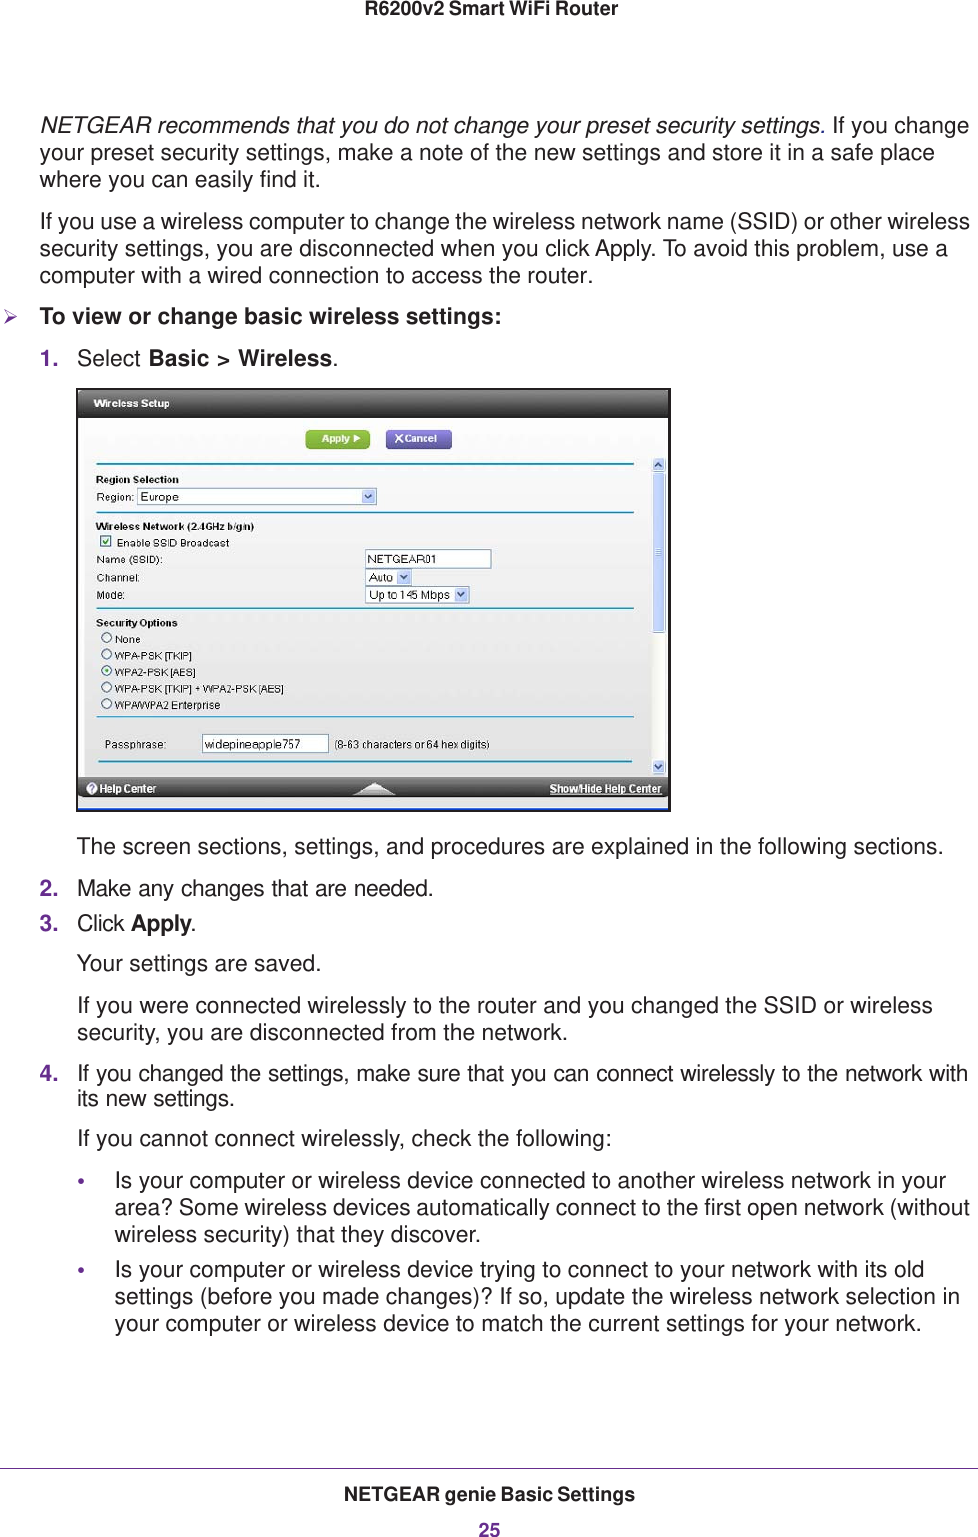 NETGEAR genie Basic Settings25 R6200v2 Smart WiFi RouterNETGEAR recommends that you do not change your preset security settings. If you change your preset security settings, make a note of the new settings and store it in a safe place where you can easily find it.If you use a wireless computer to change the wireless network name (SSID) or other wireless security settings, you are disconnected when you click Apply. To avoid this problem, use a computer with a wired connection to access the router.To view or change basic wireless settings:1. Select Basic &gt; Wireless.The screen sections, settings, and procedures are explained in the following sections.2. Make any changes that are needed.3. Click Apply.Your settings are saved.If you were connected wirelessly to the router and you changed the SSID or wireless security, you are disconnected from the network.4. If you changed the settings, make sure that you can connect wirelessly to the network with its new settings. If you cannot connect wirelessly, check the following:•Is your computer or wireless device connected to another wireless network in your area? Some wireless devices automatically connect to the first open network (without wireless security) that they discover.•Is your computer or wireless device trying to connect to your network with its old settings (before you made changes)? If so, update the wireless network selection in your computer or wireless device to match the current settings for your network.